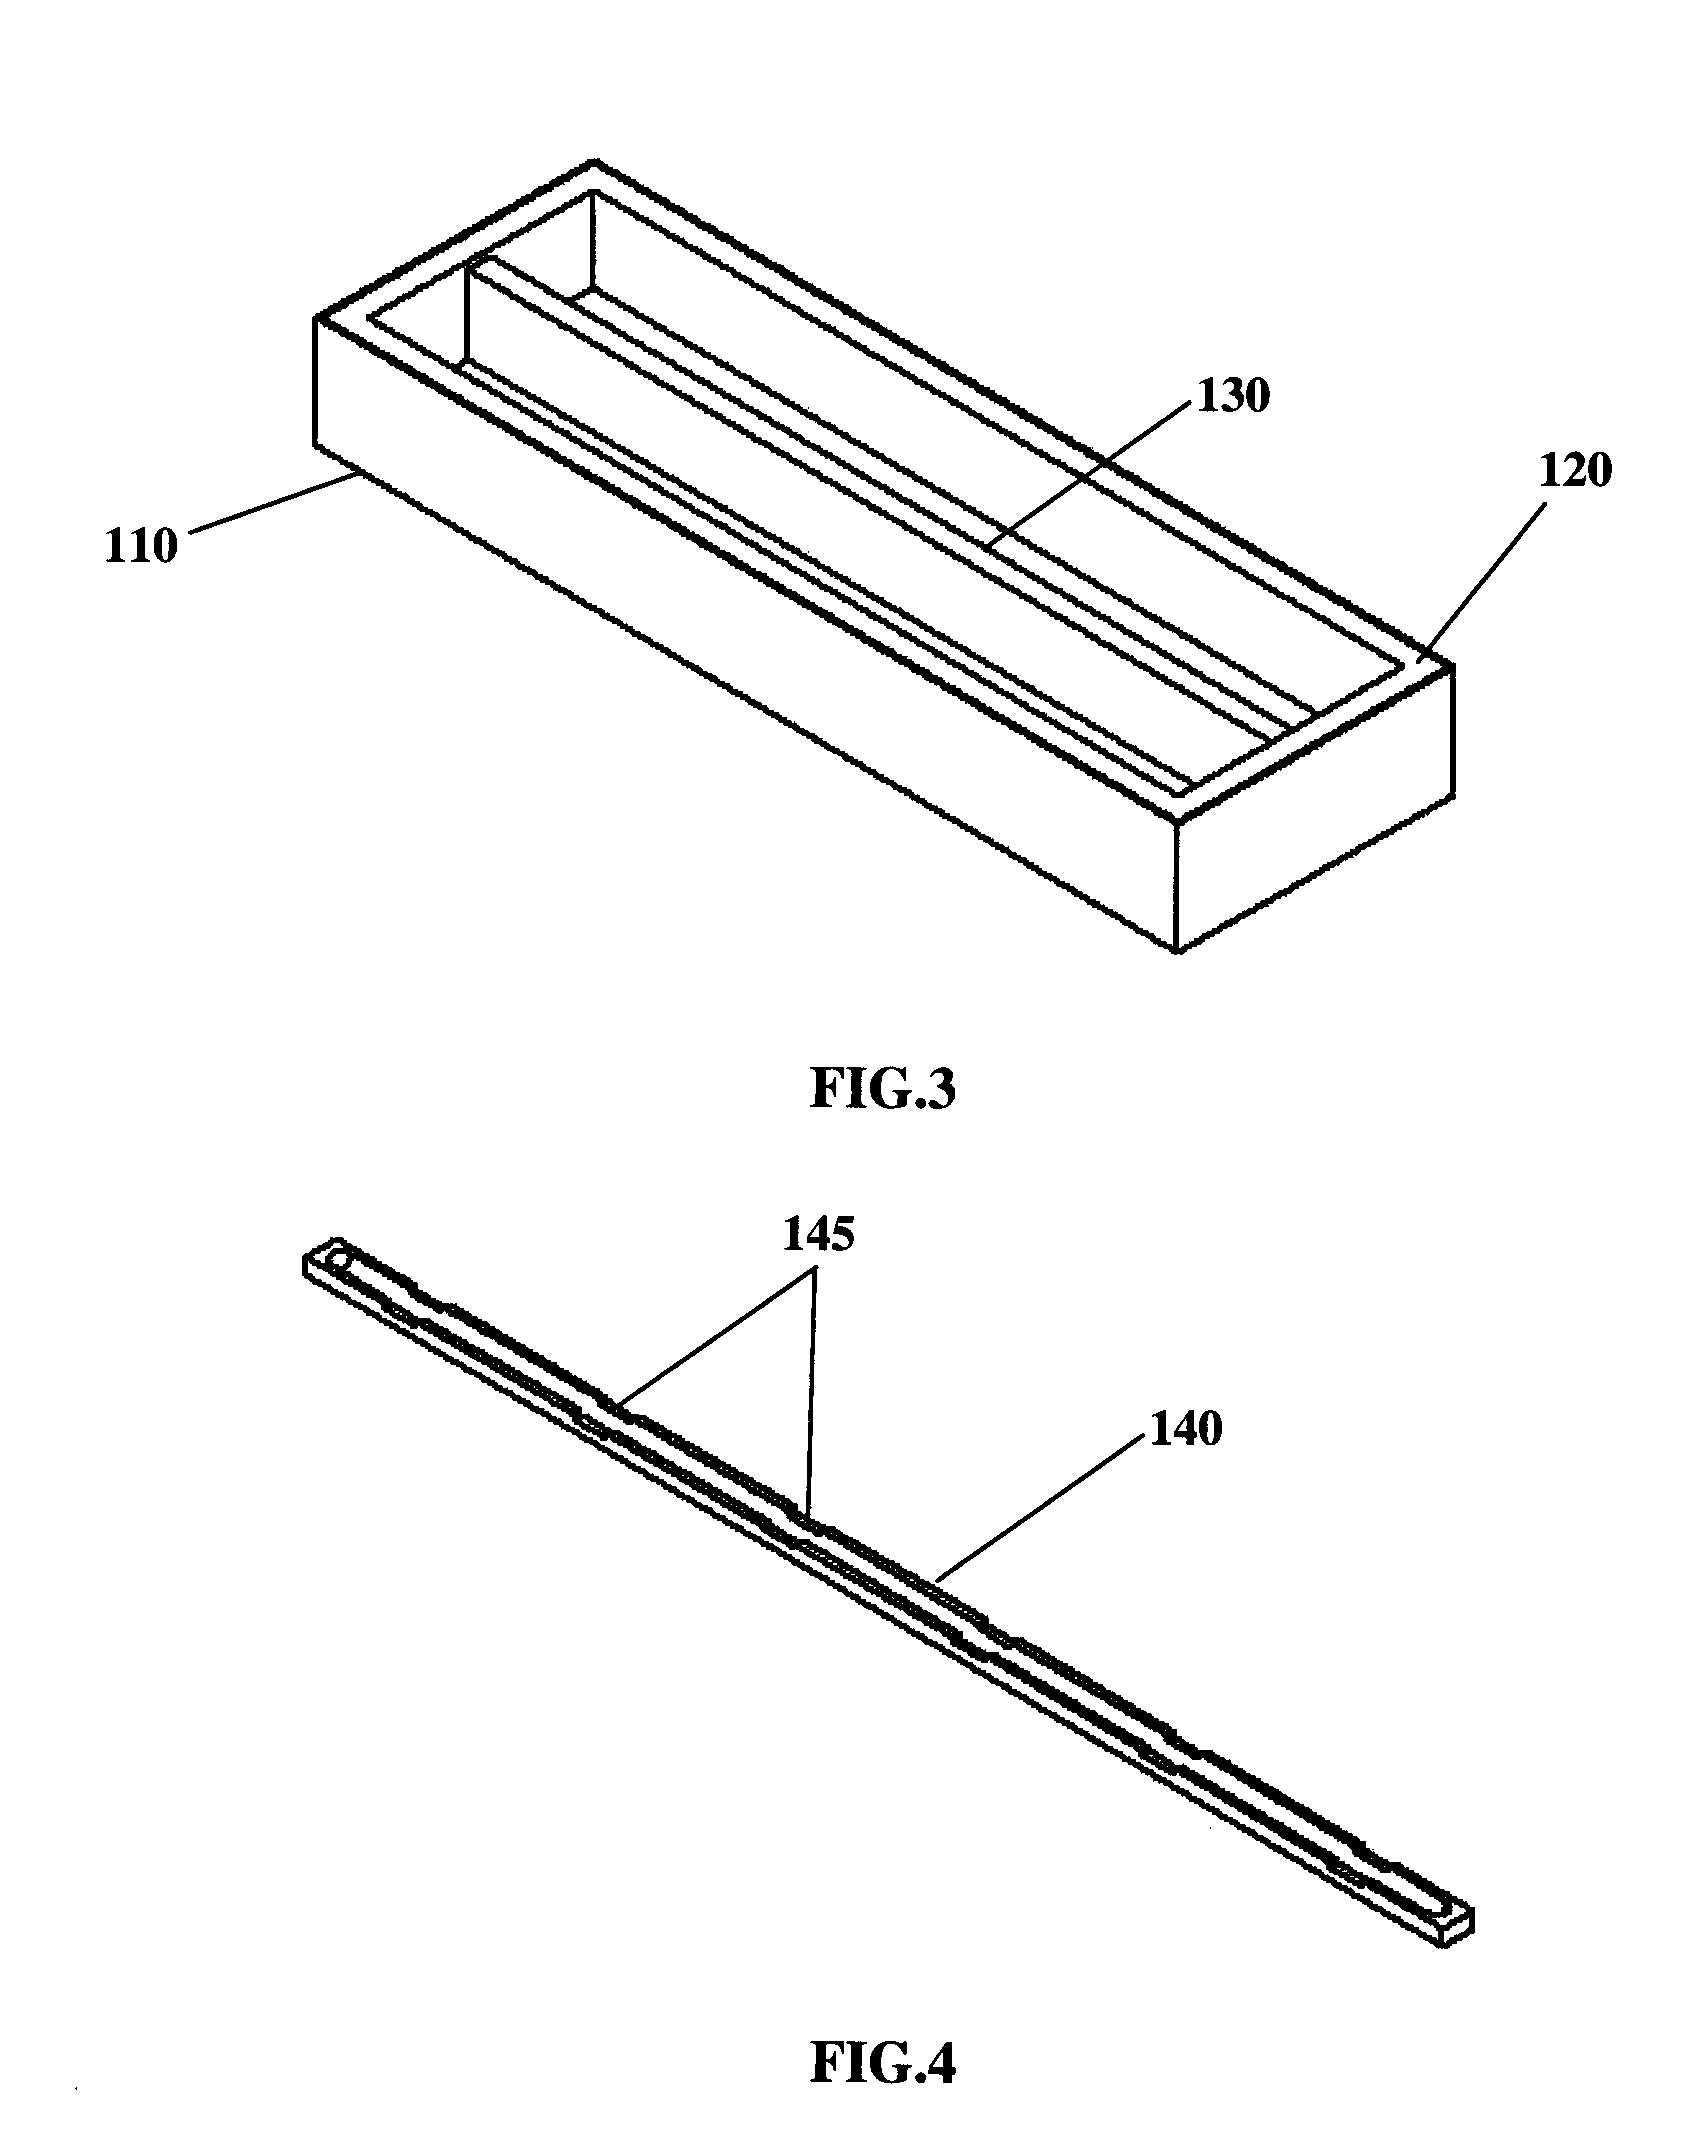 Molding apparatus and method